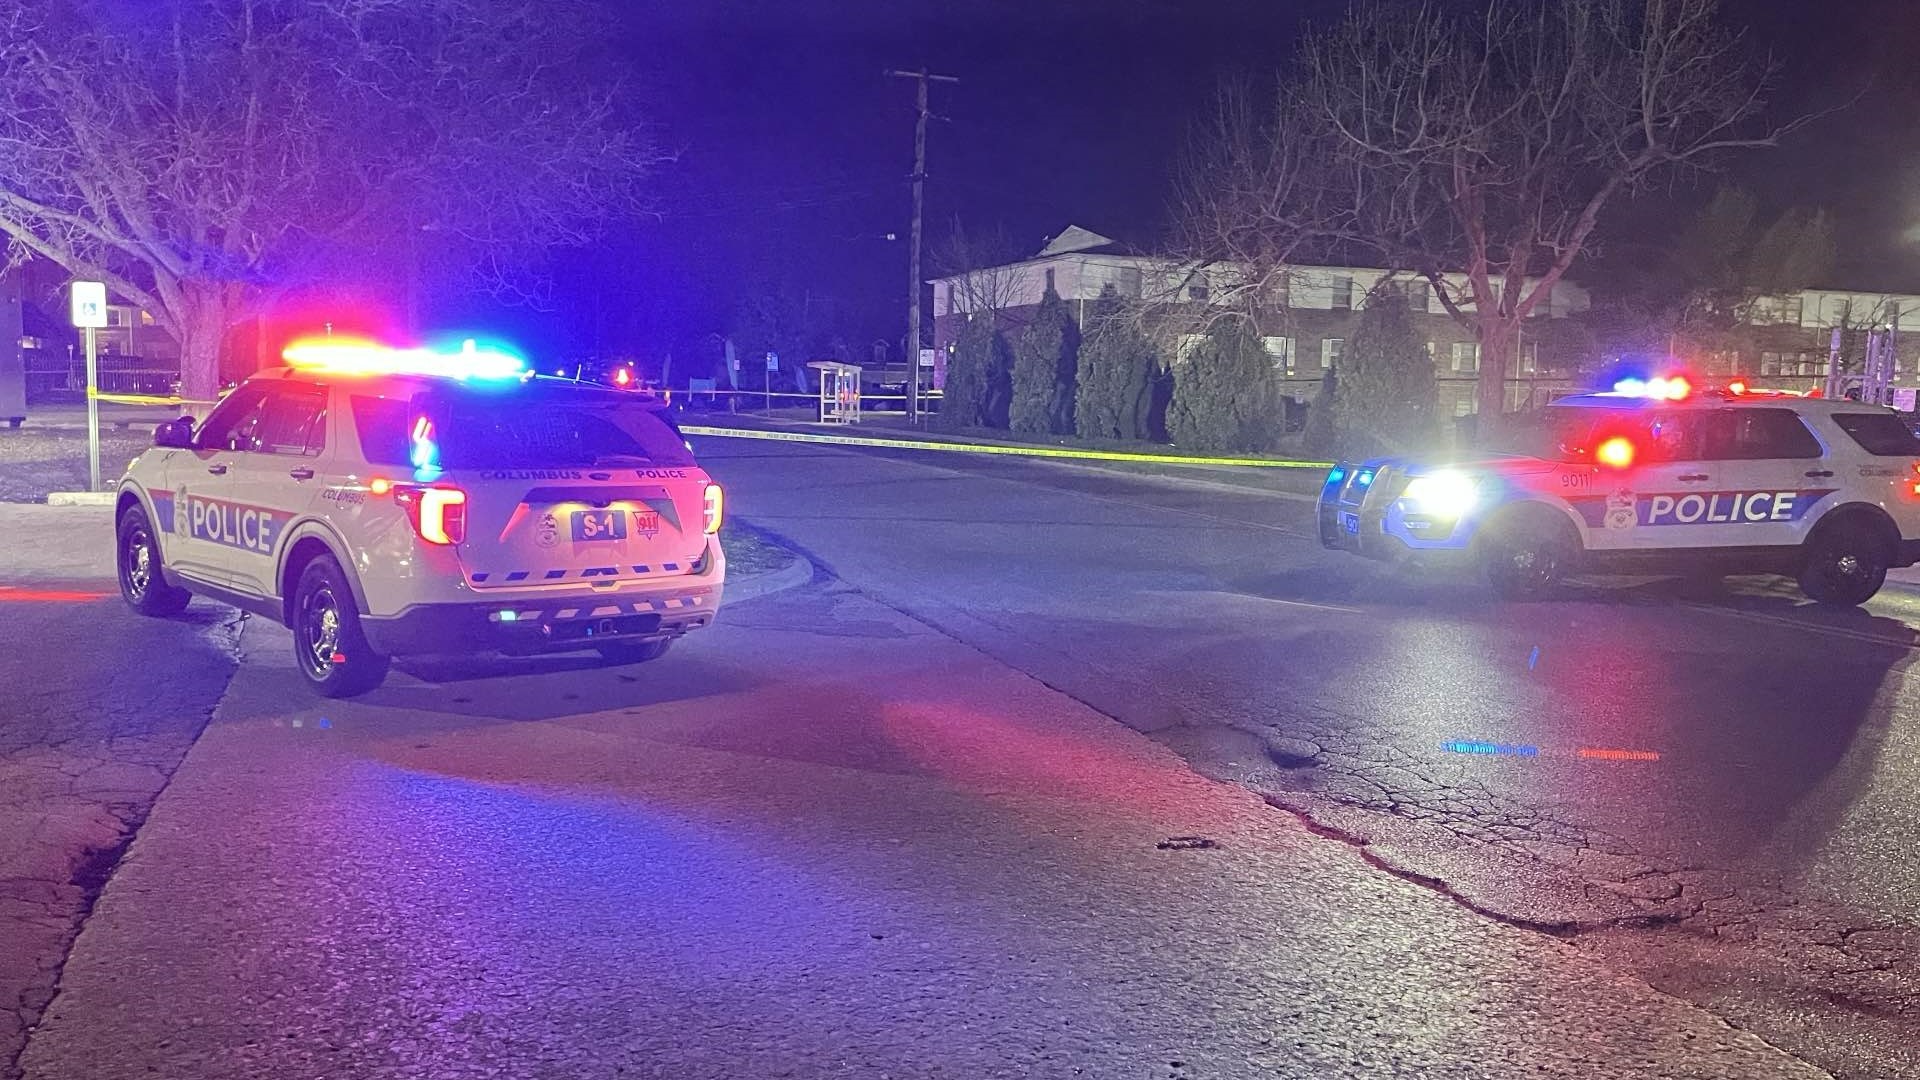 A 51-year-old man died after he was struck while crossing the street in north Columbus Monday night.